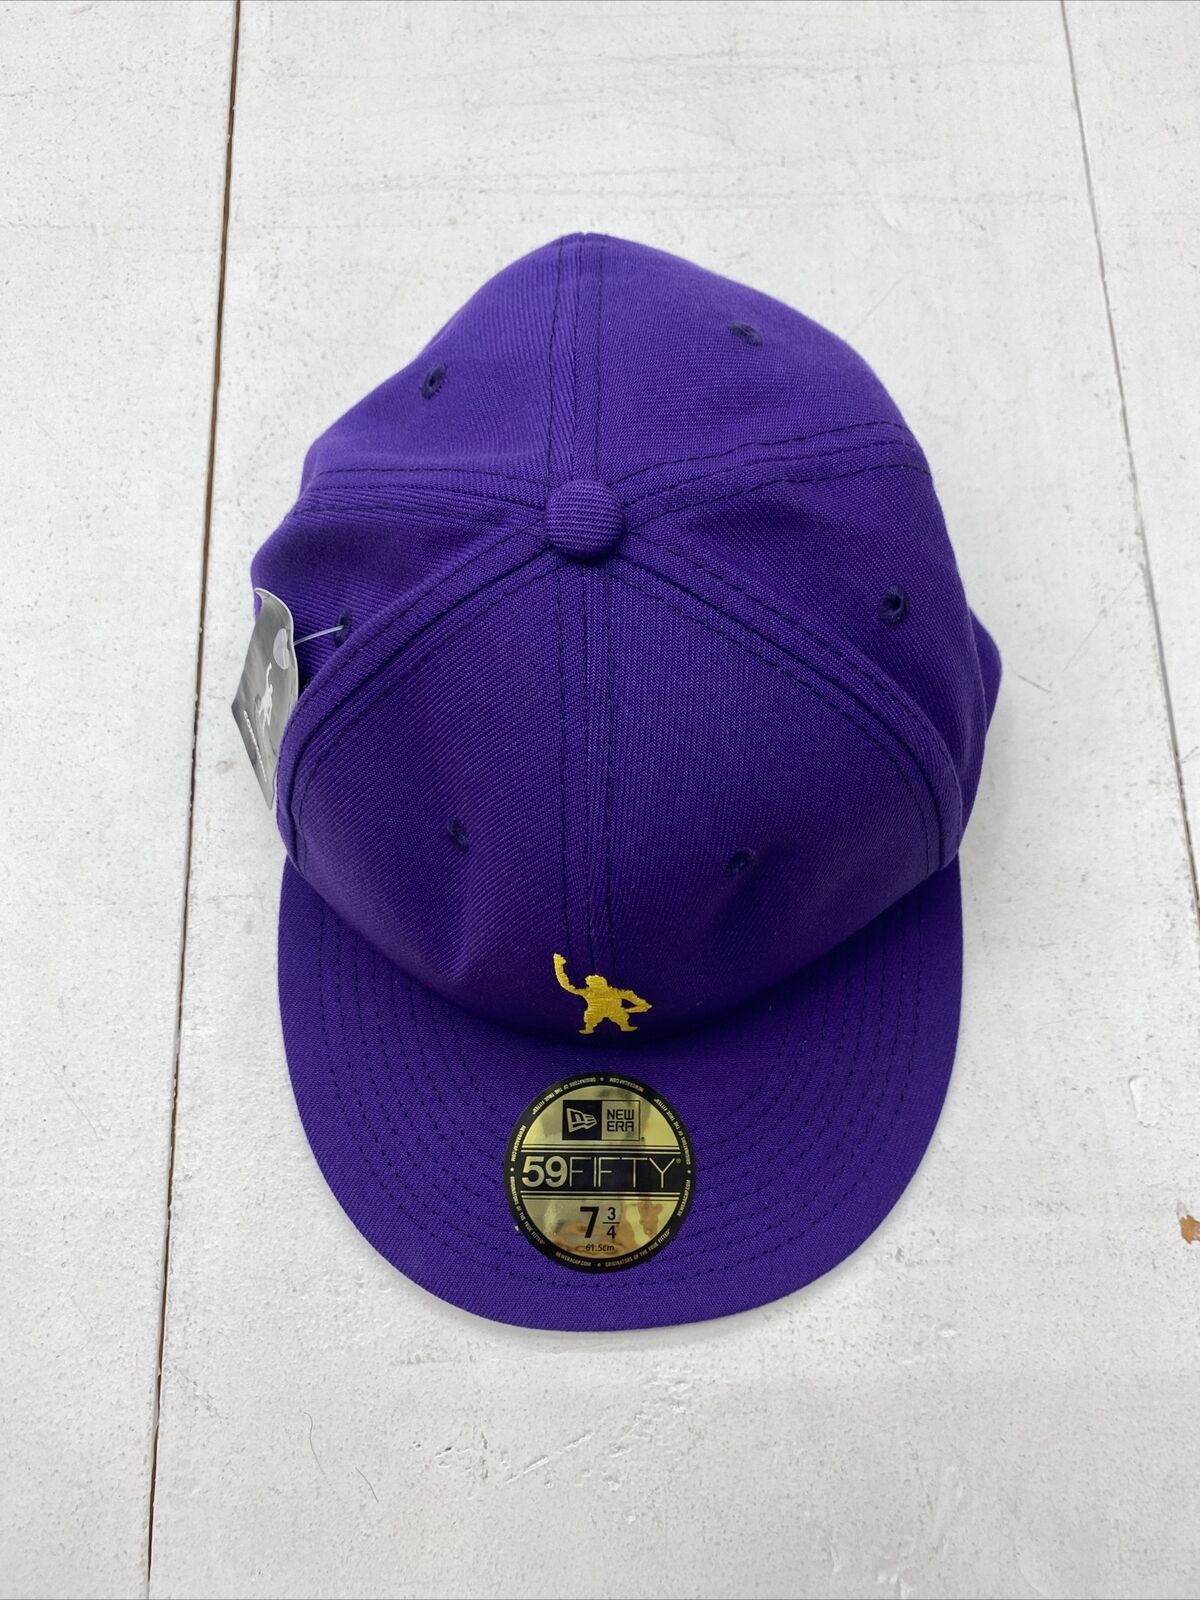 Los Angeles Lakers New Era 59Fifty Hat Cap Fitted Hat Size 7 3/4